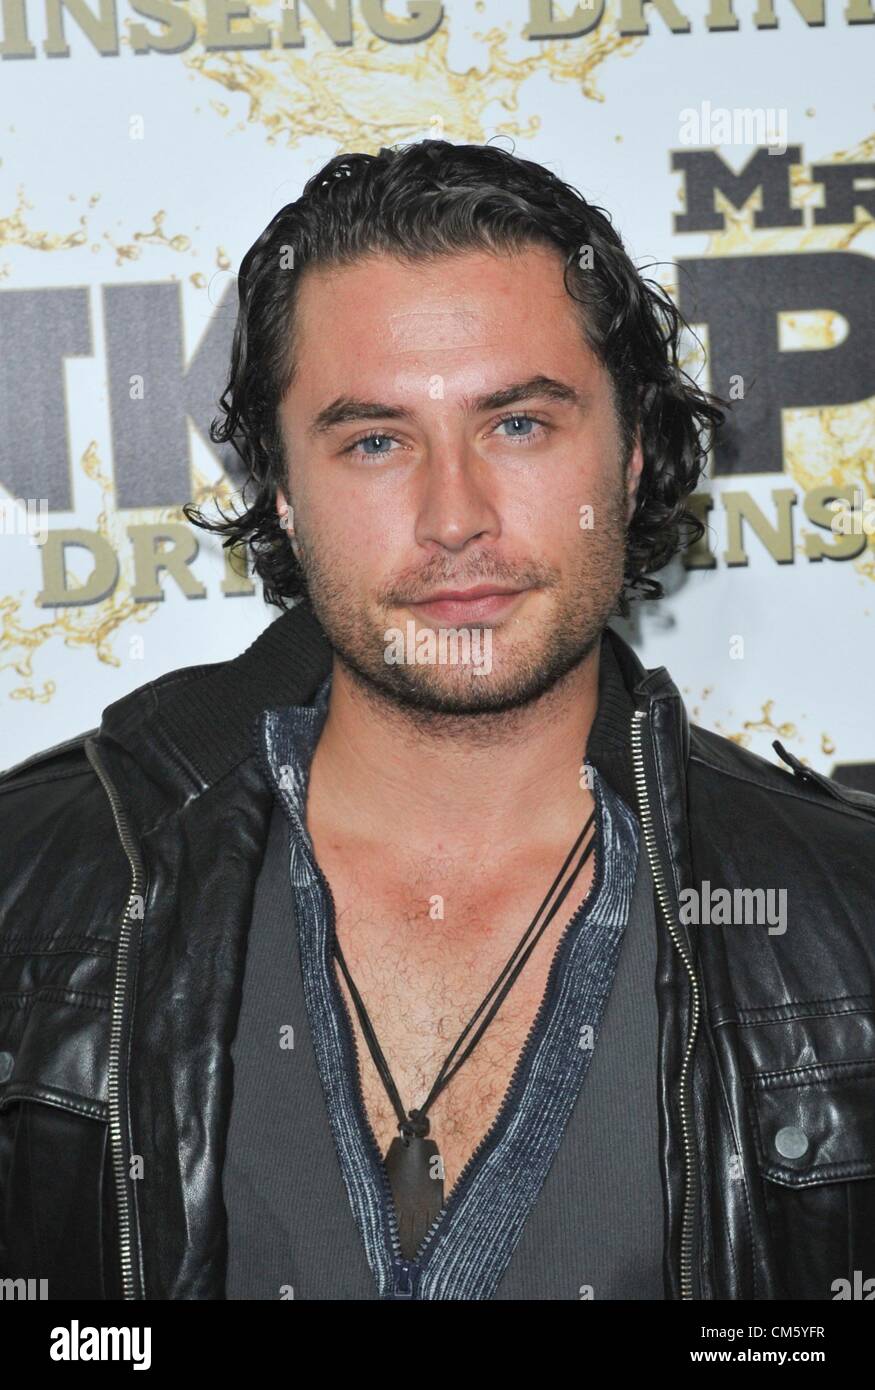 Los Angeles, California, USA. 11th October 2012. Kevin Ryan at arrivals for Mr. Pink Ginseng Drink Launch Party, The Blvd at Regent Beverly Wilshire Hotel, Beverly Hills, CA October 11, 2012. Photo By: Elizabeth Goodenough/Everett Collection/Alamy Live News Stock Photo